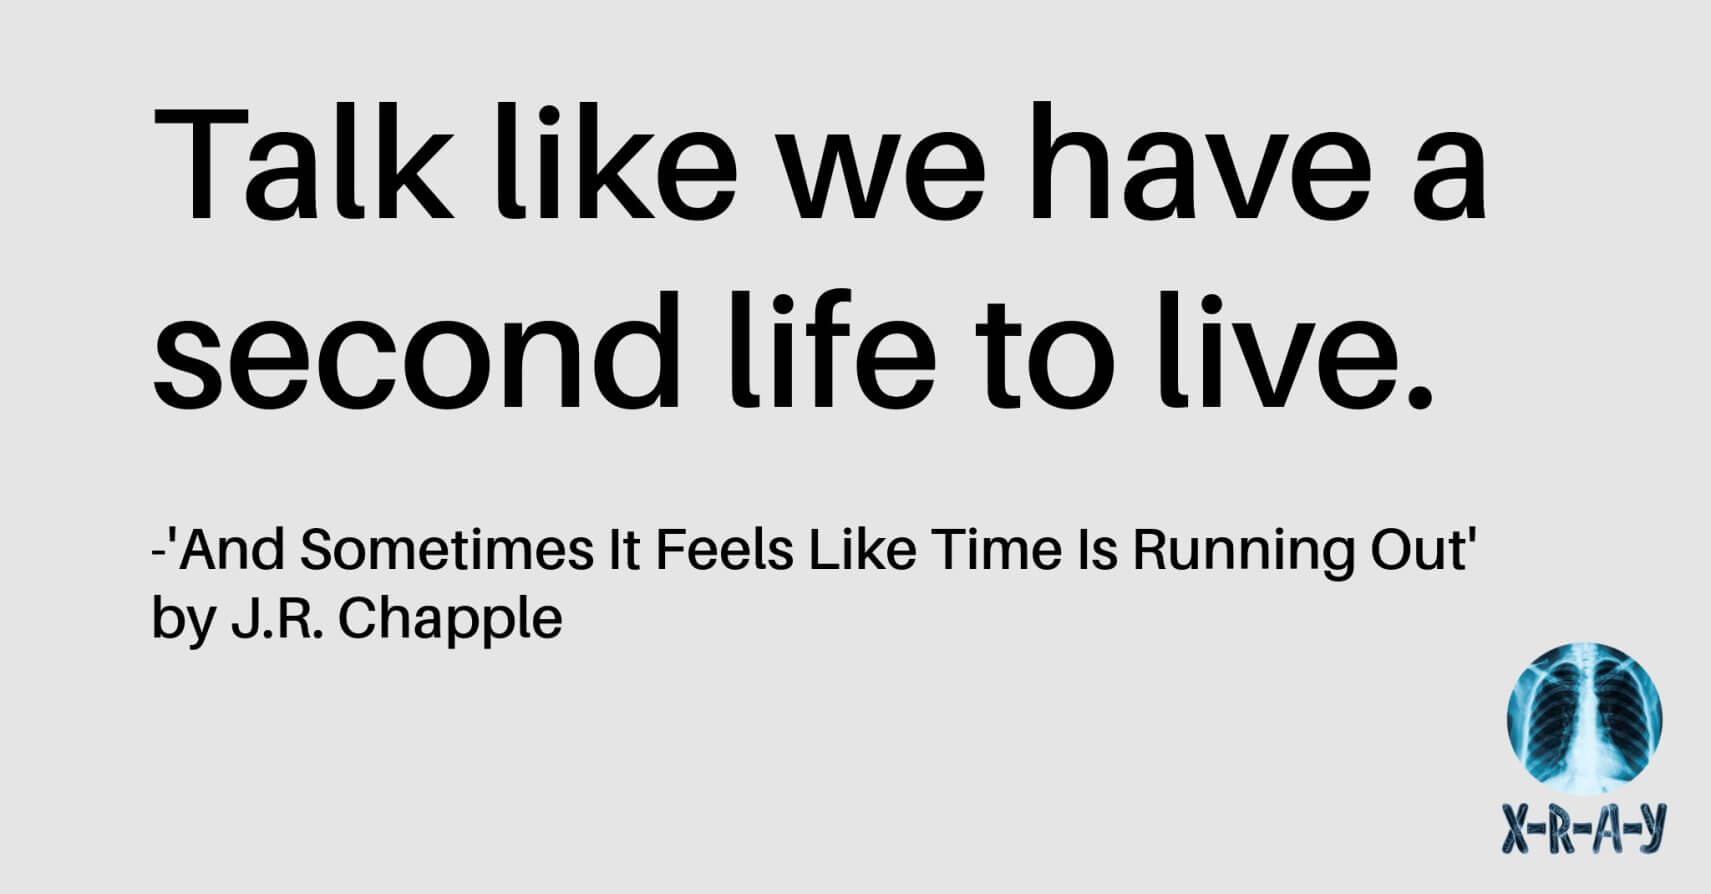 AND SOMETIMES IT FEELS LIKE TIME IS RUNNING OUT by J.R. Chapple